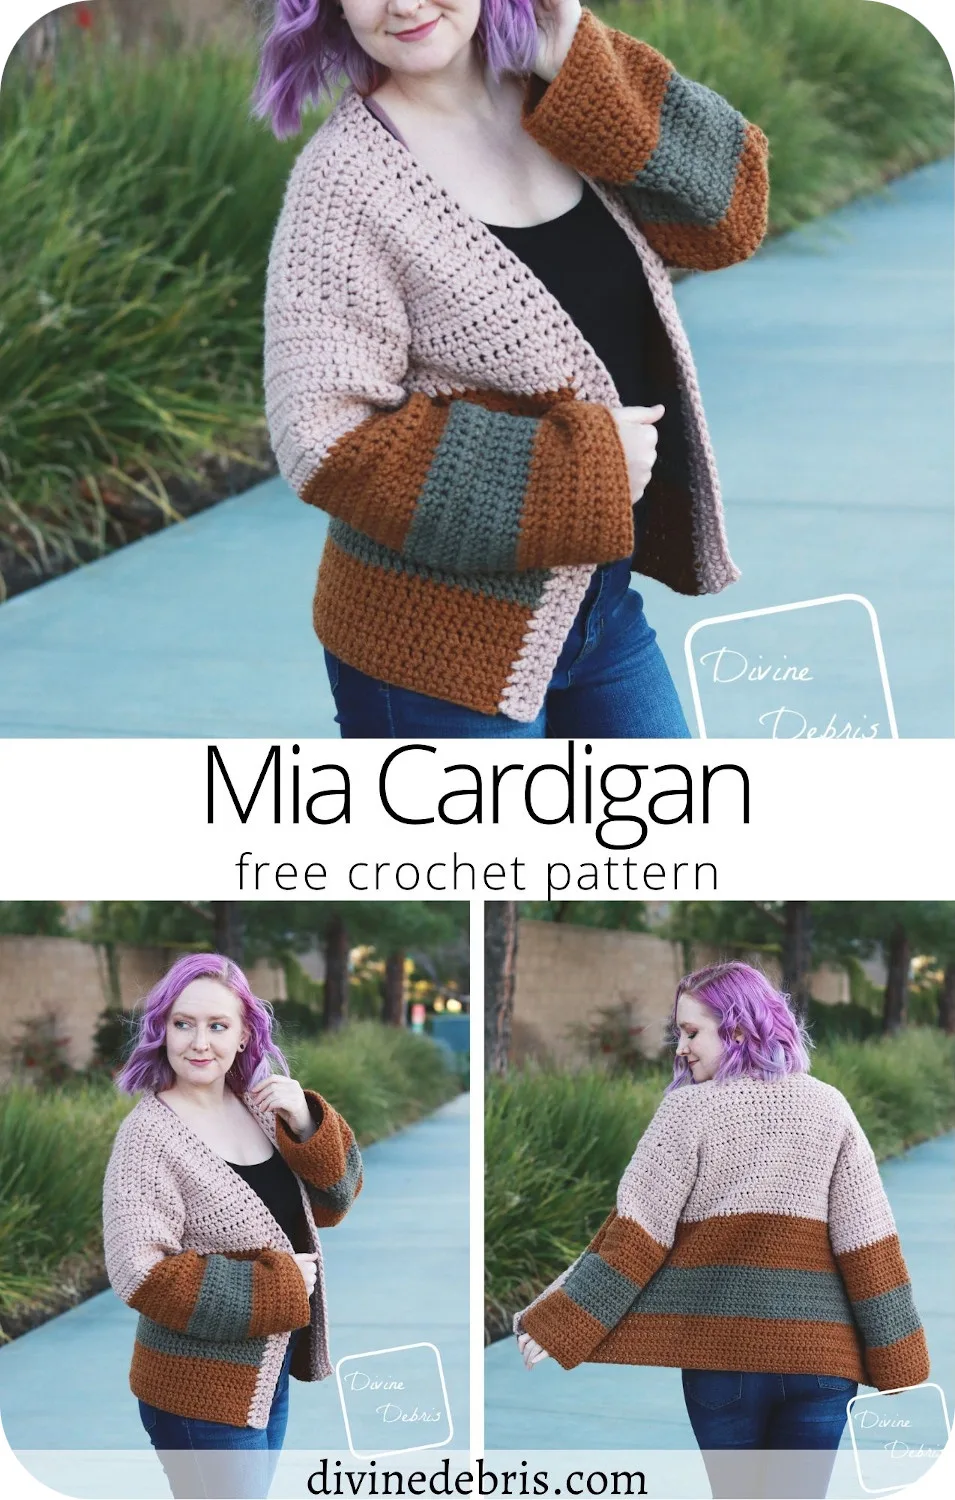 Learn to make the easy, squishy, and striped cardi  using bulky weight yarn, the Mia Cardigan, from a free crochet pattern on DivineDebris.com